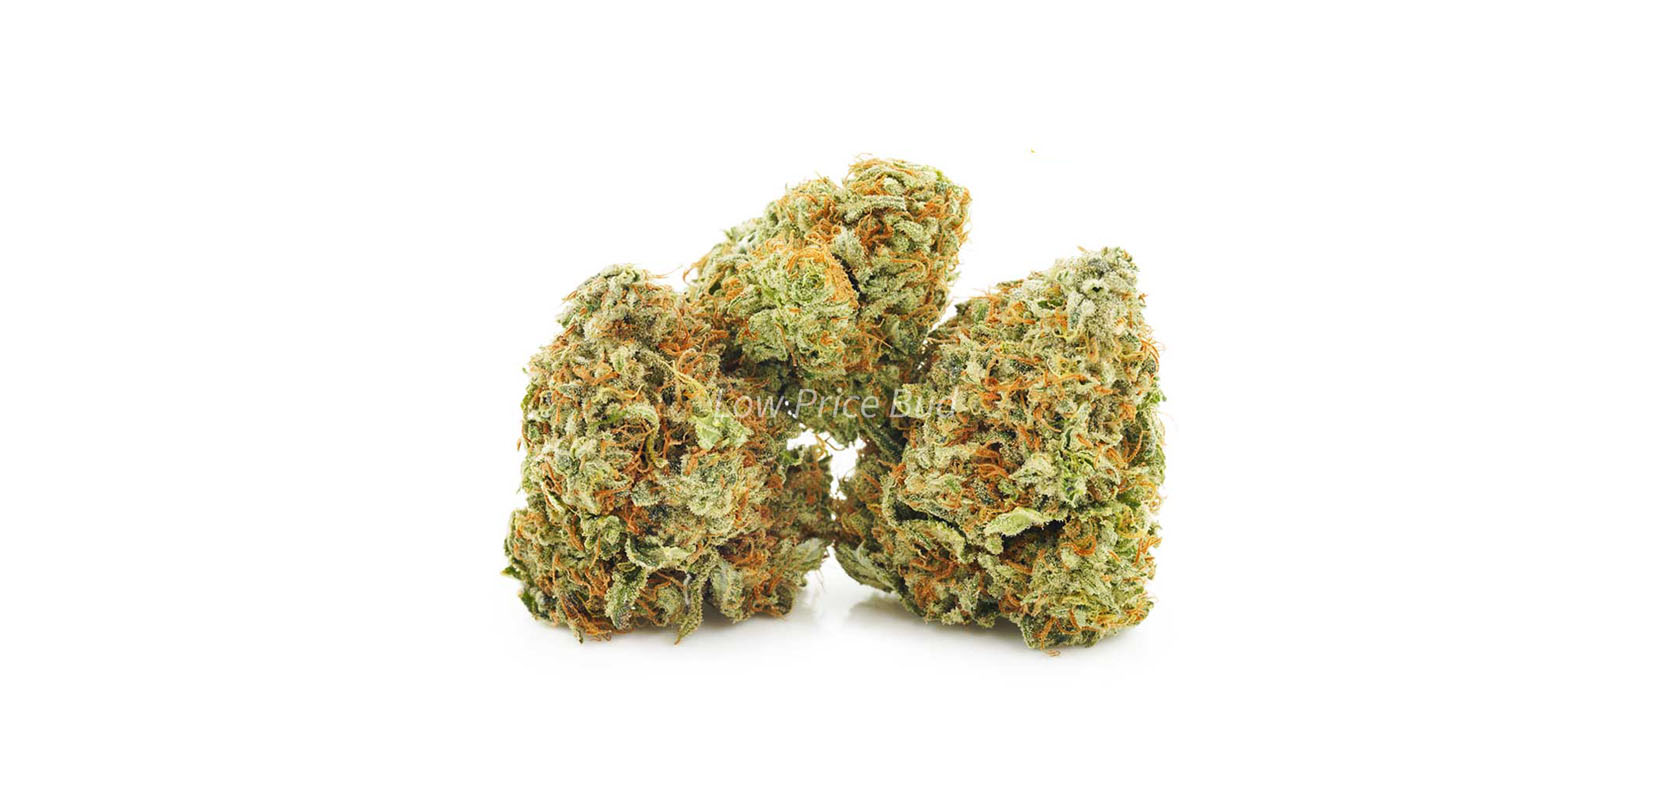 Girl Scout Cookies AA Weed online. Buy budget ounces of weed from the best online dispensary in Canada for BC cannabis.